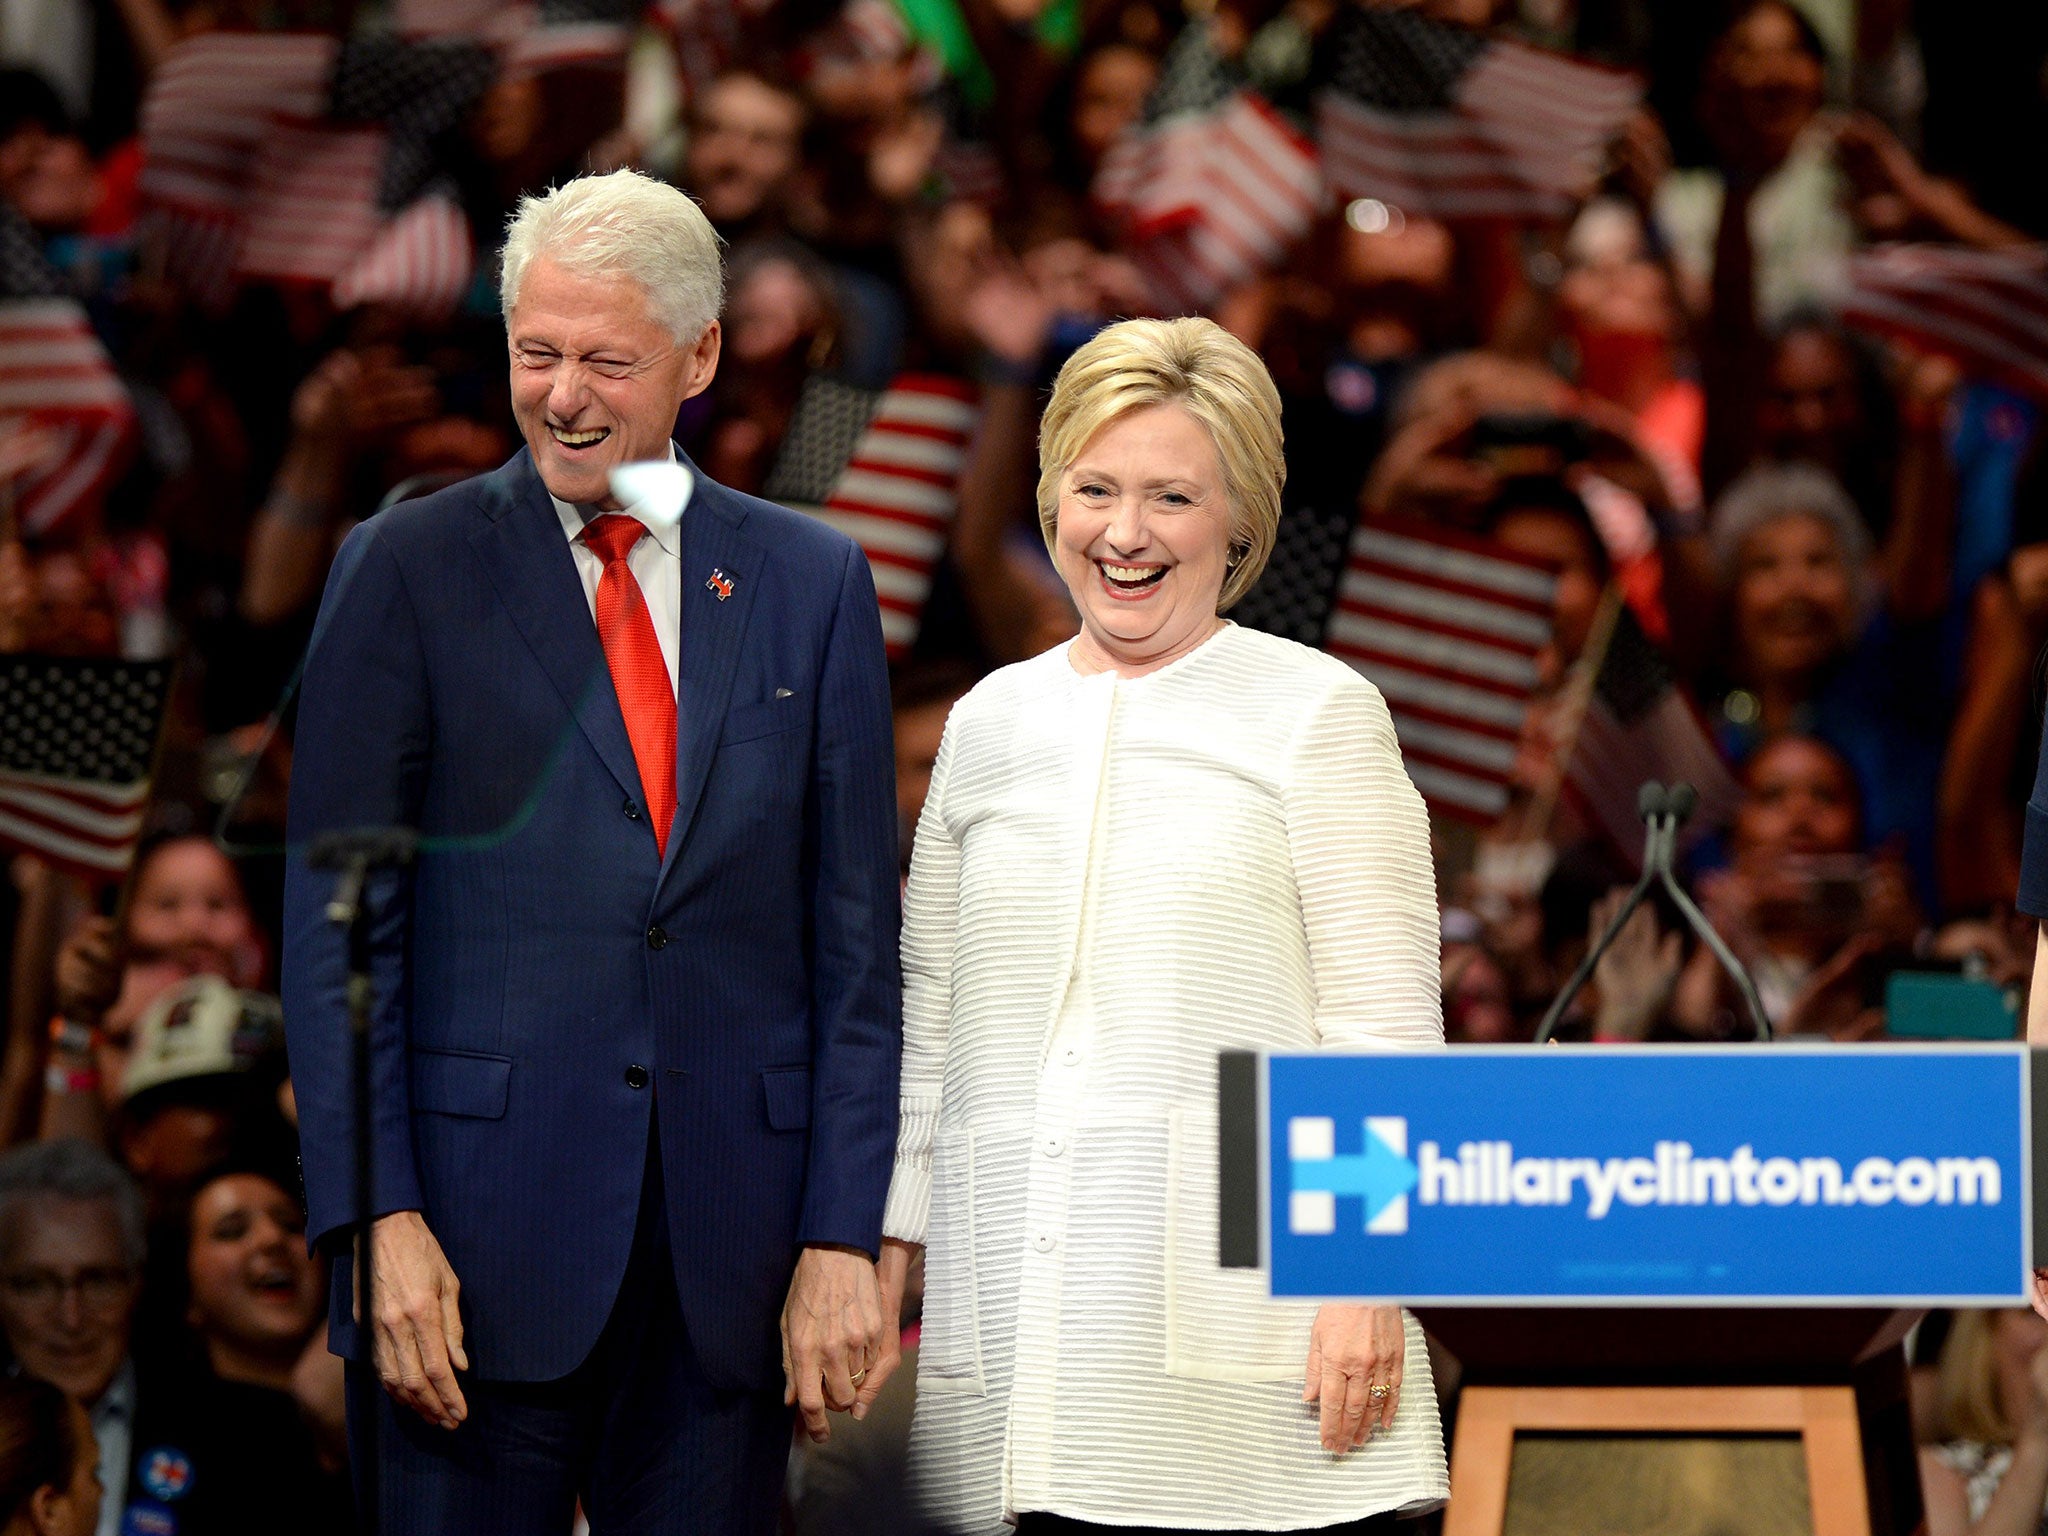 Hillary Clinton campaigning with husband Bill in Brooklyn, New York, earlier this month